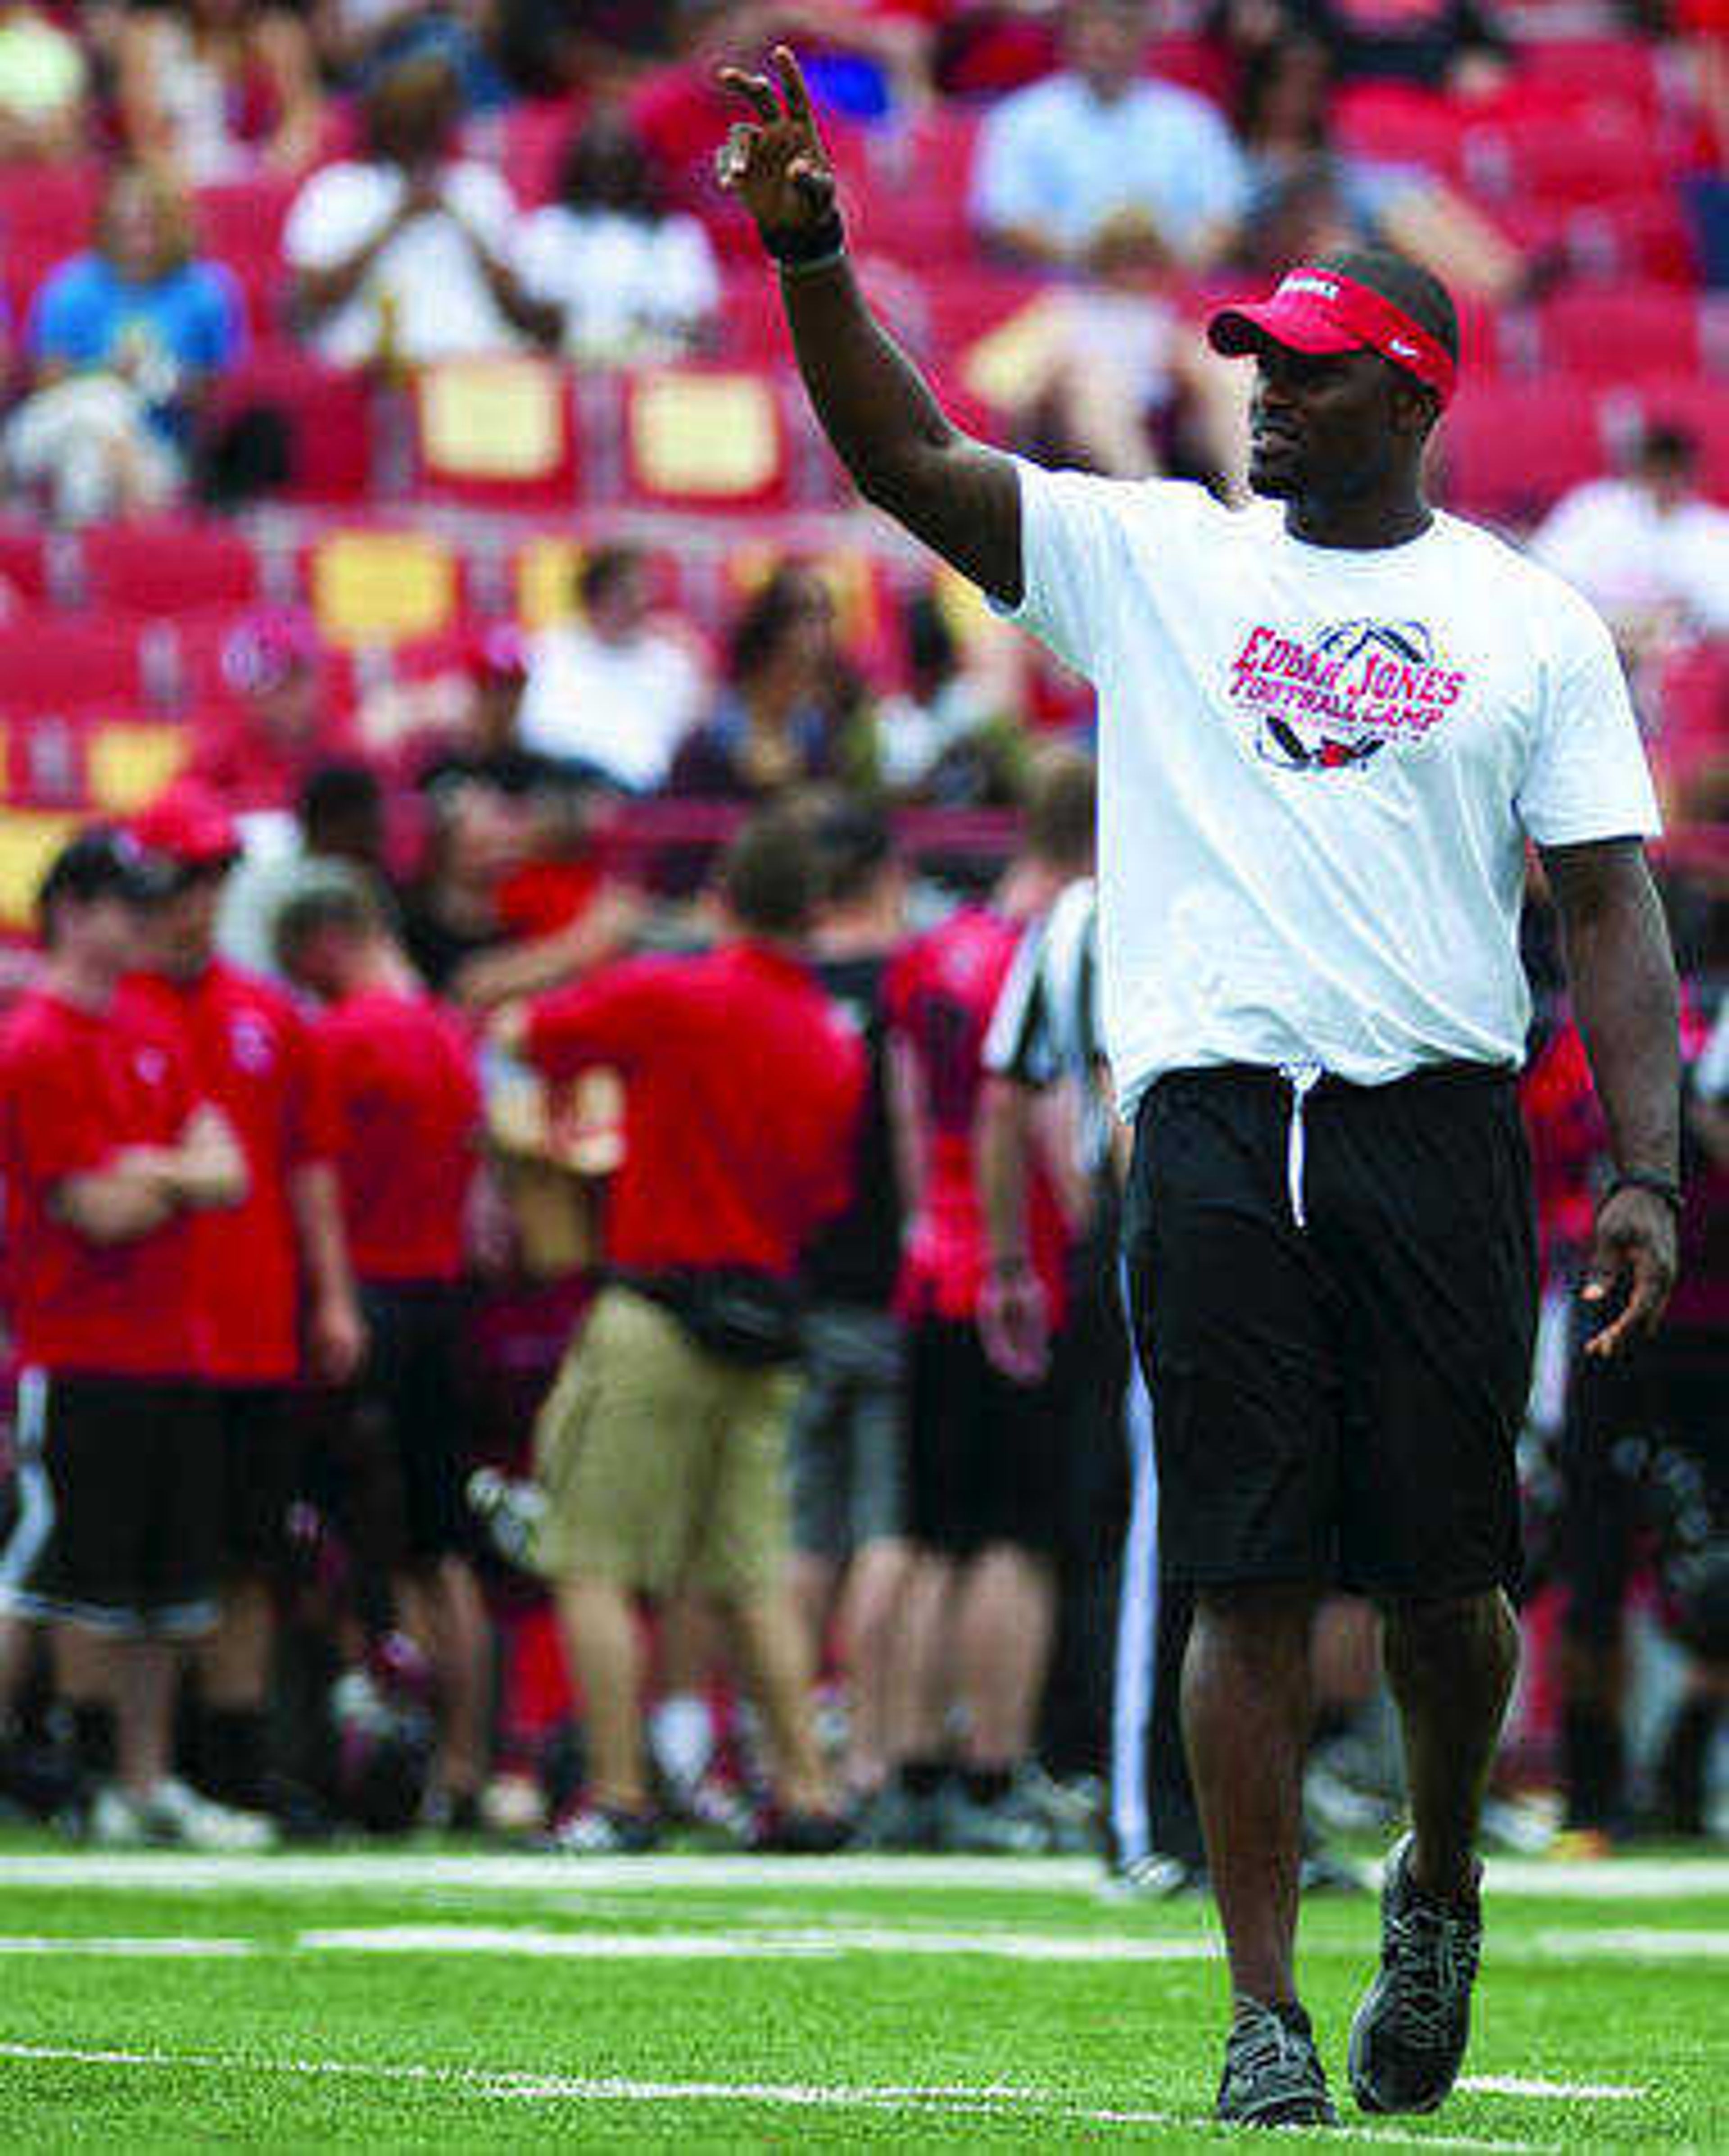 Edgar Jones will be hosting his second annual Youth Football Clinic from 10 a.m. to noon on Saturday at Houck Stadium.